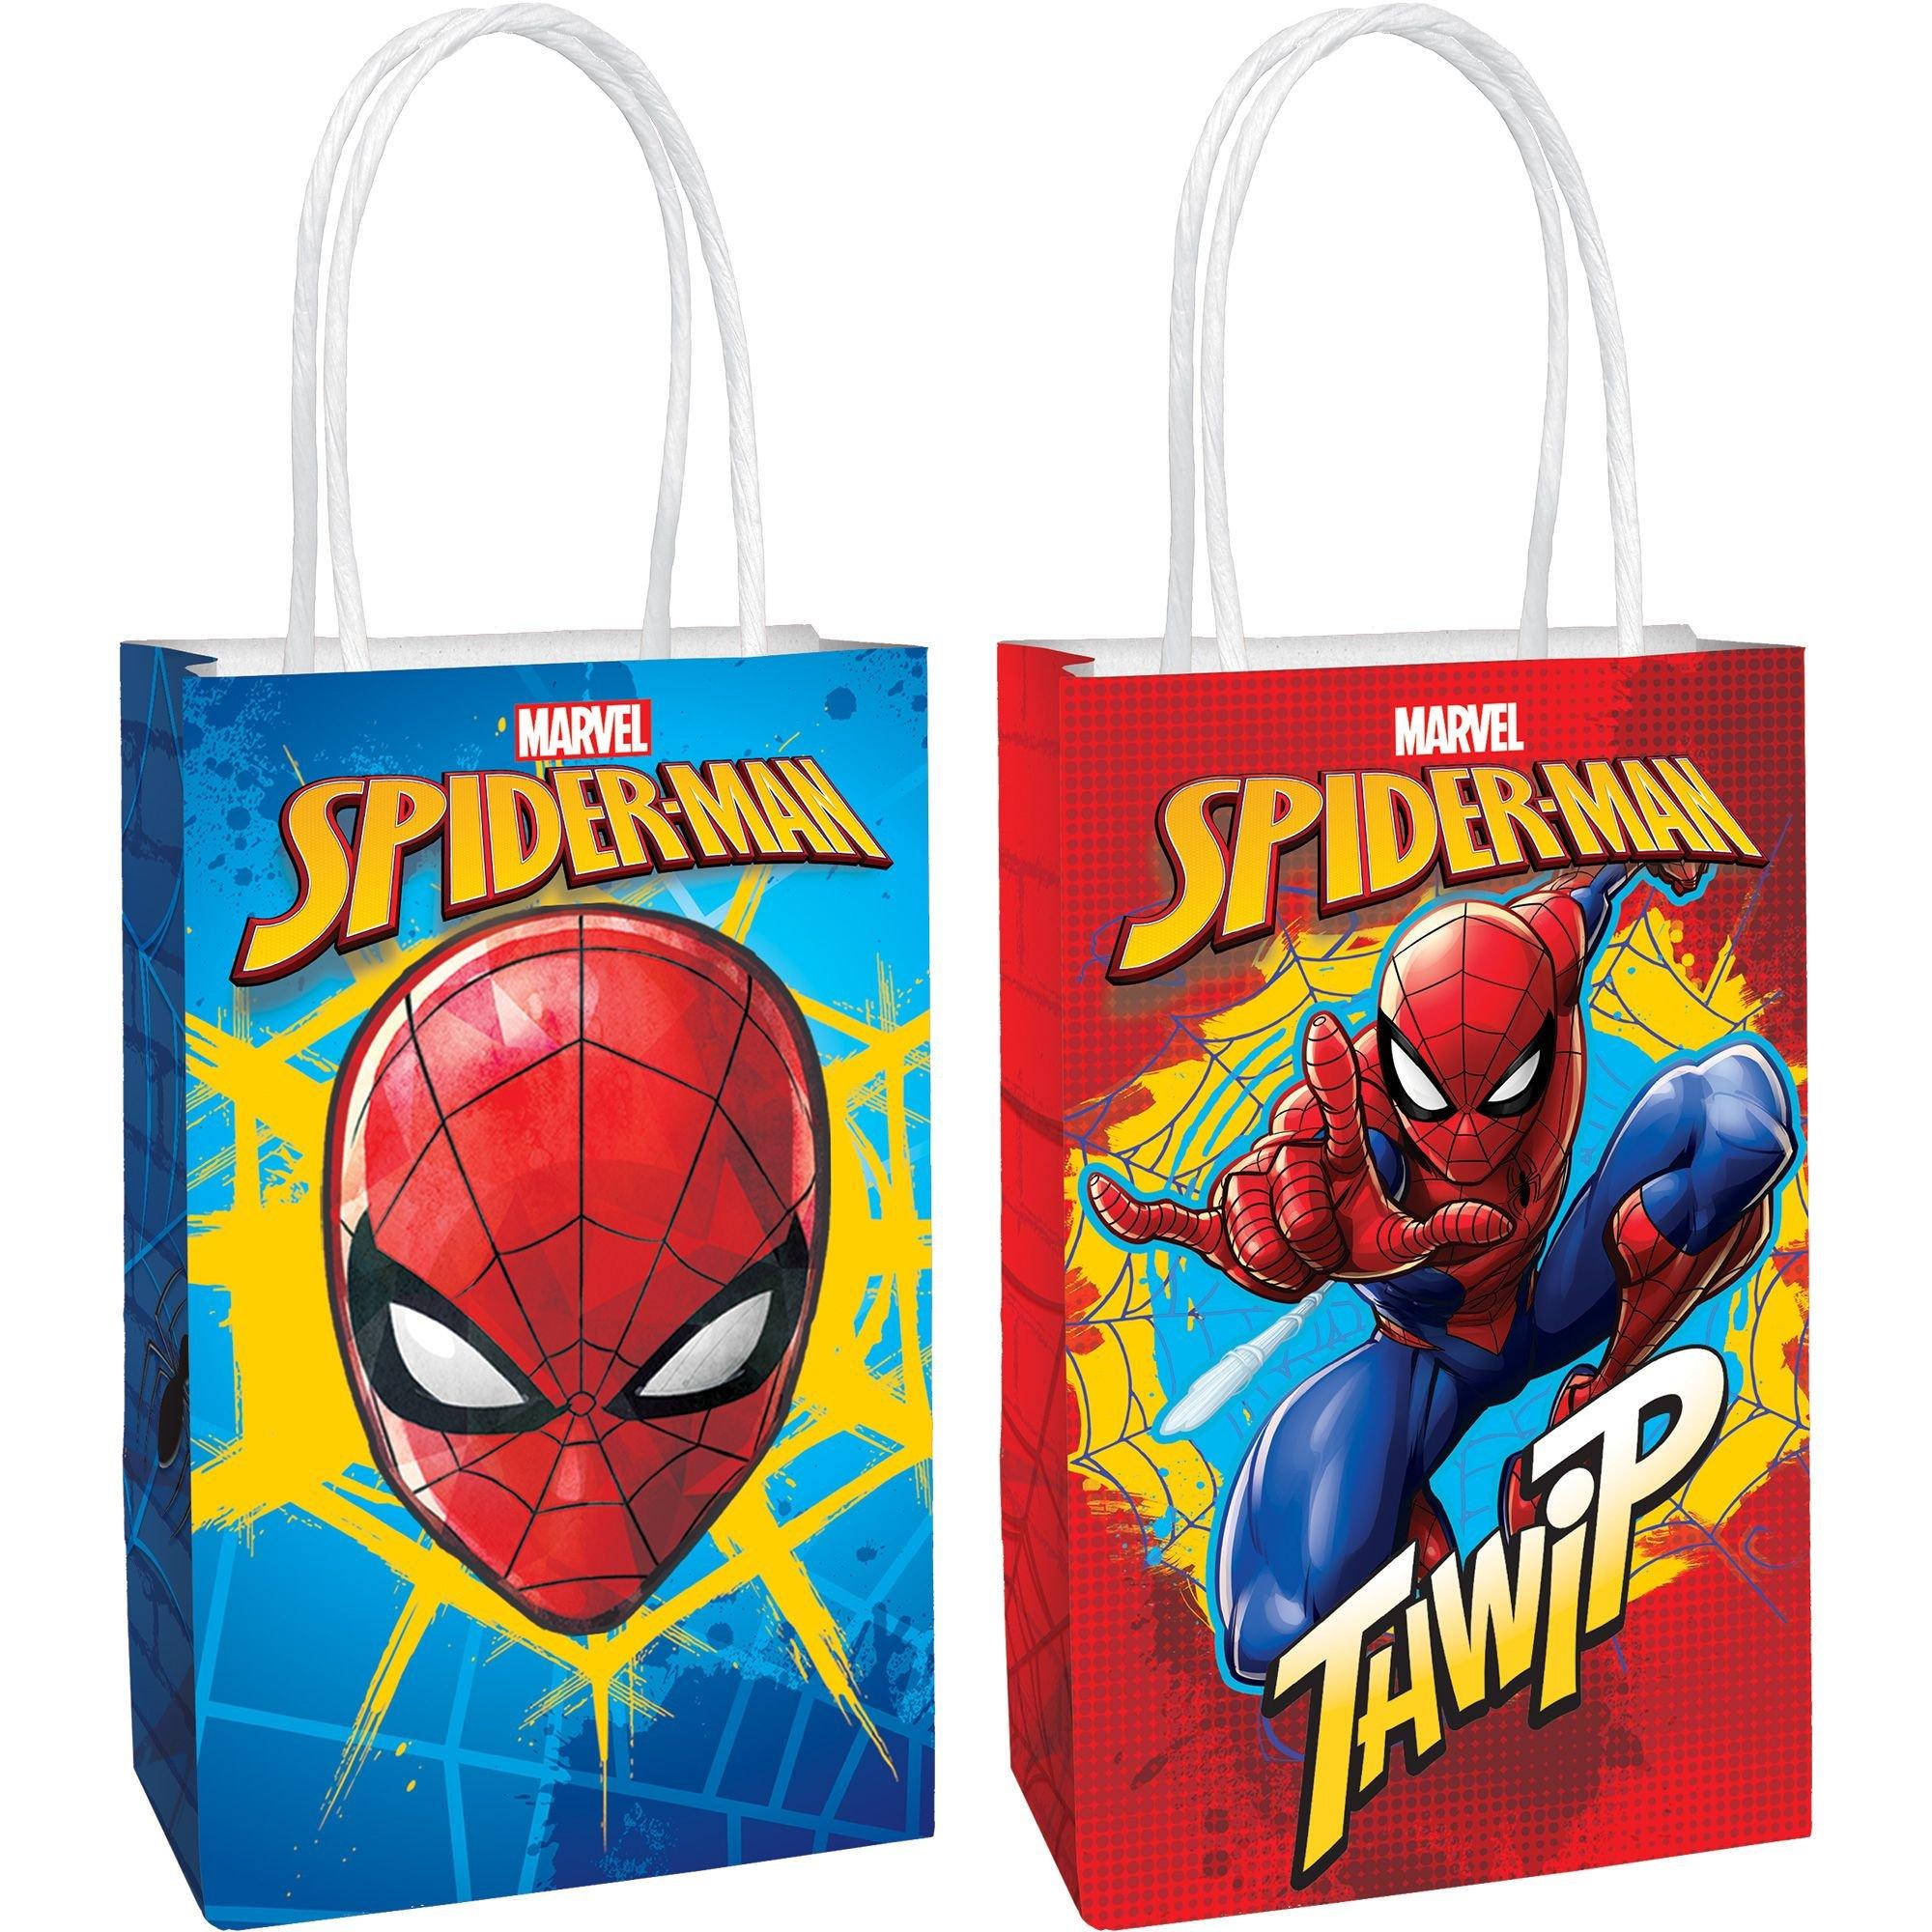 50 Pcs Kids Party Favors Bags, Birthday Goodie Candy Bags, Party Goody  Favor Bags for Kids Birthday, goodie bags for kids birthday party, Loot Bags  for Kids Birthday Party(star pattern 5colors) 